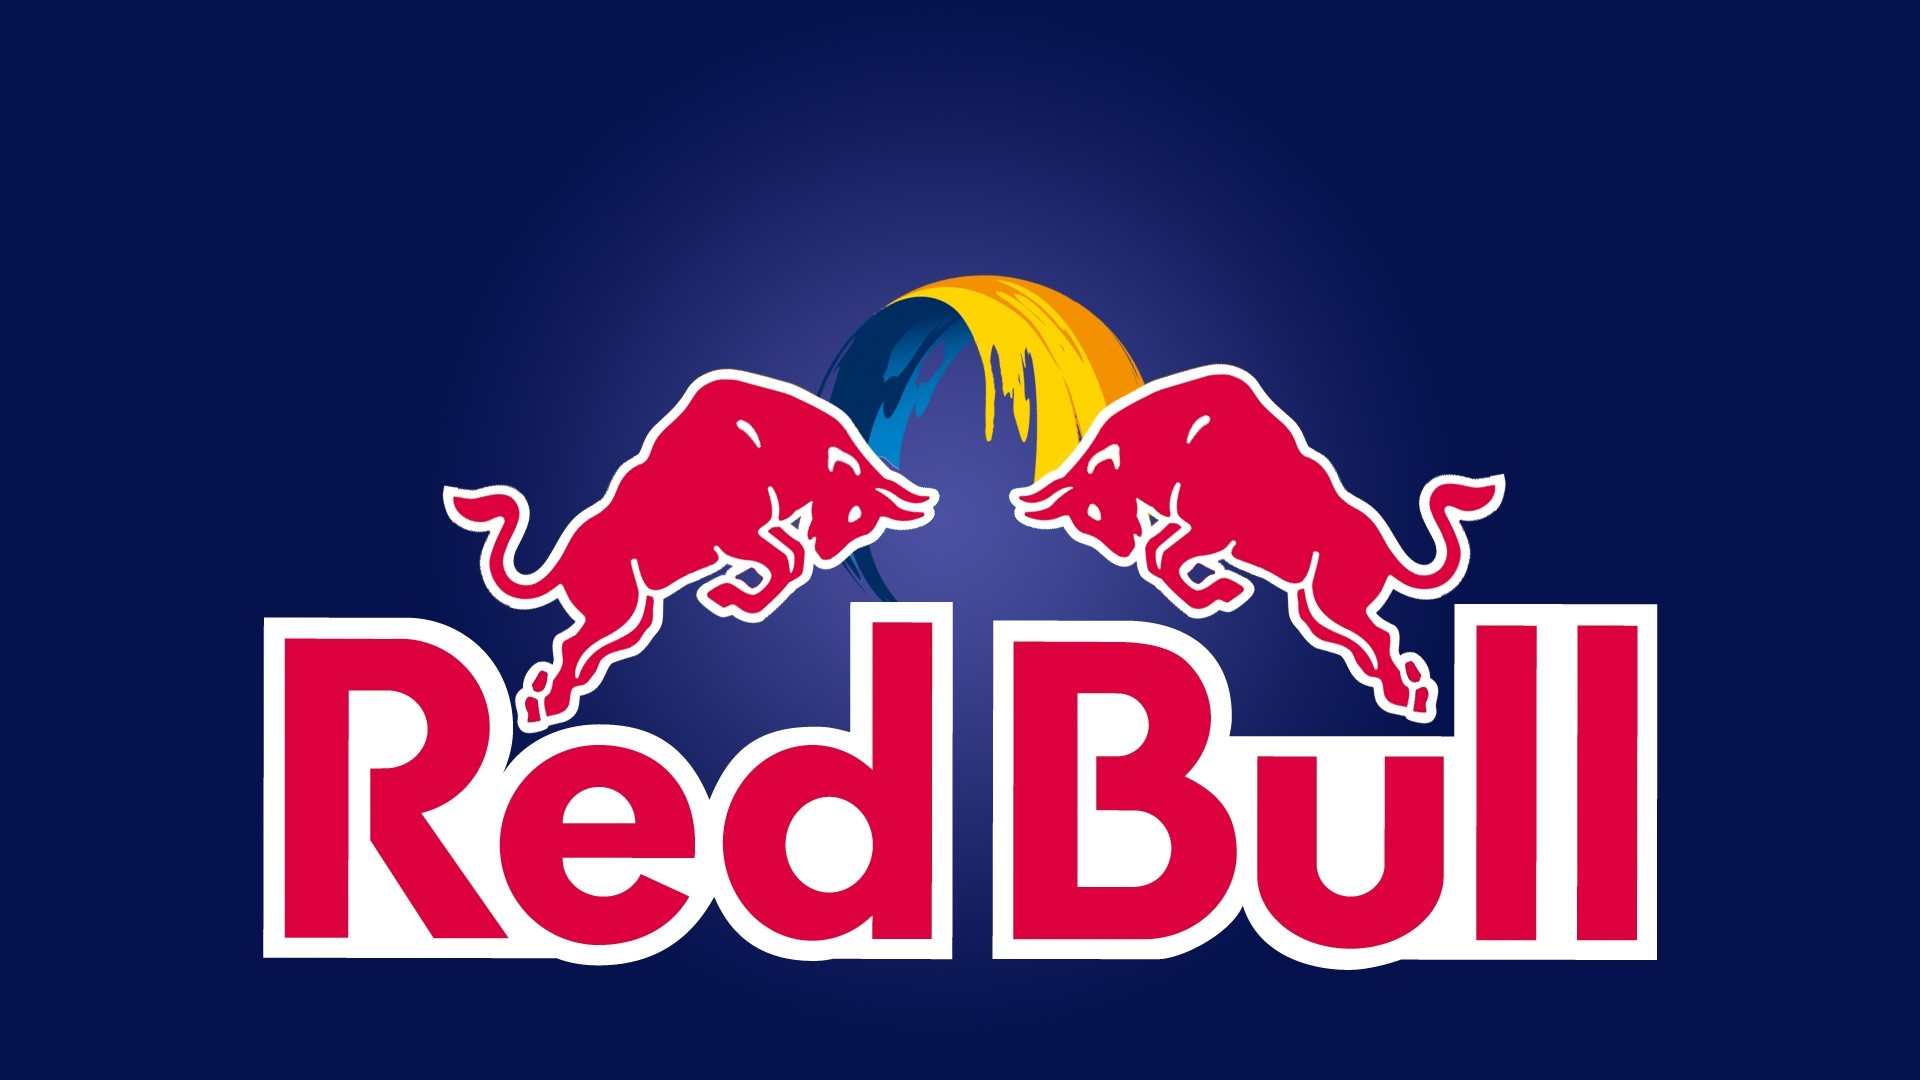 Red Bull Logo: A drink enhancing physical endurance, concentration and reaction speed. 1920x1080 Full HD Wallpaper.